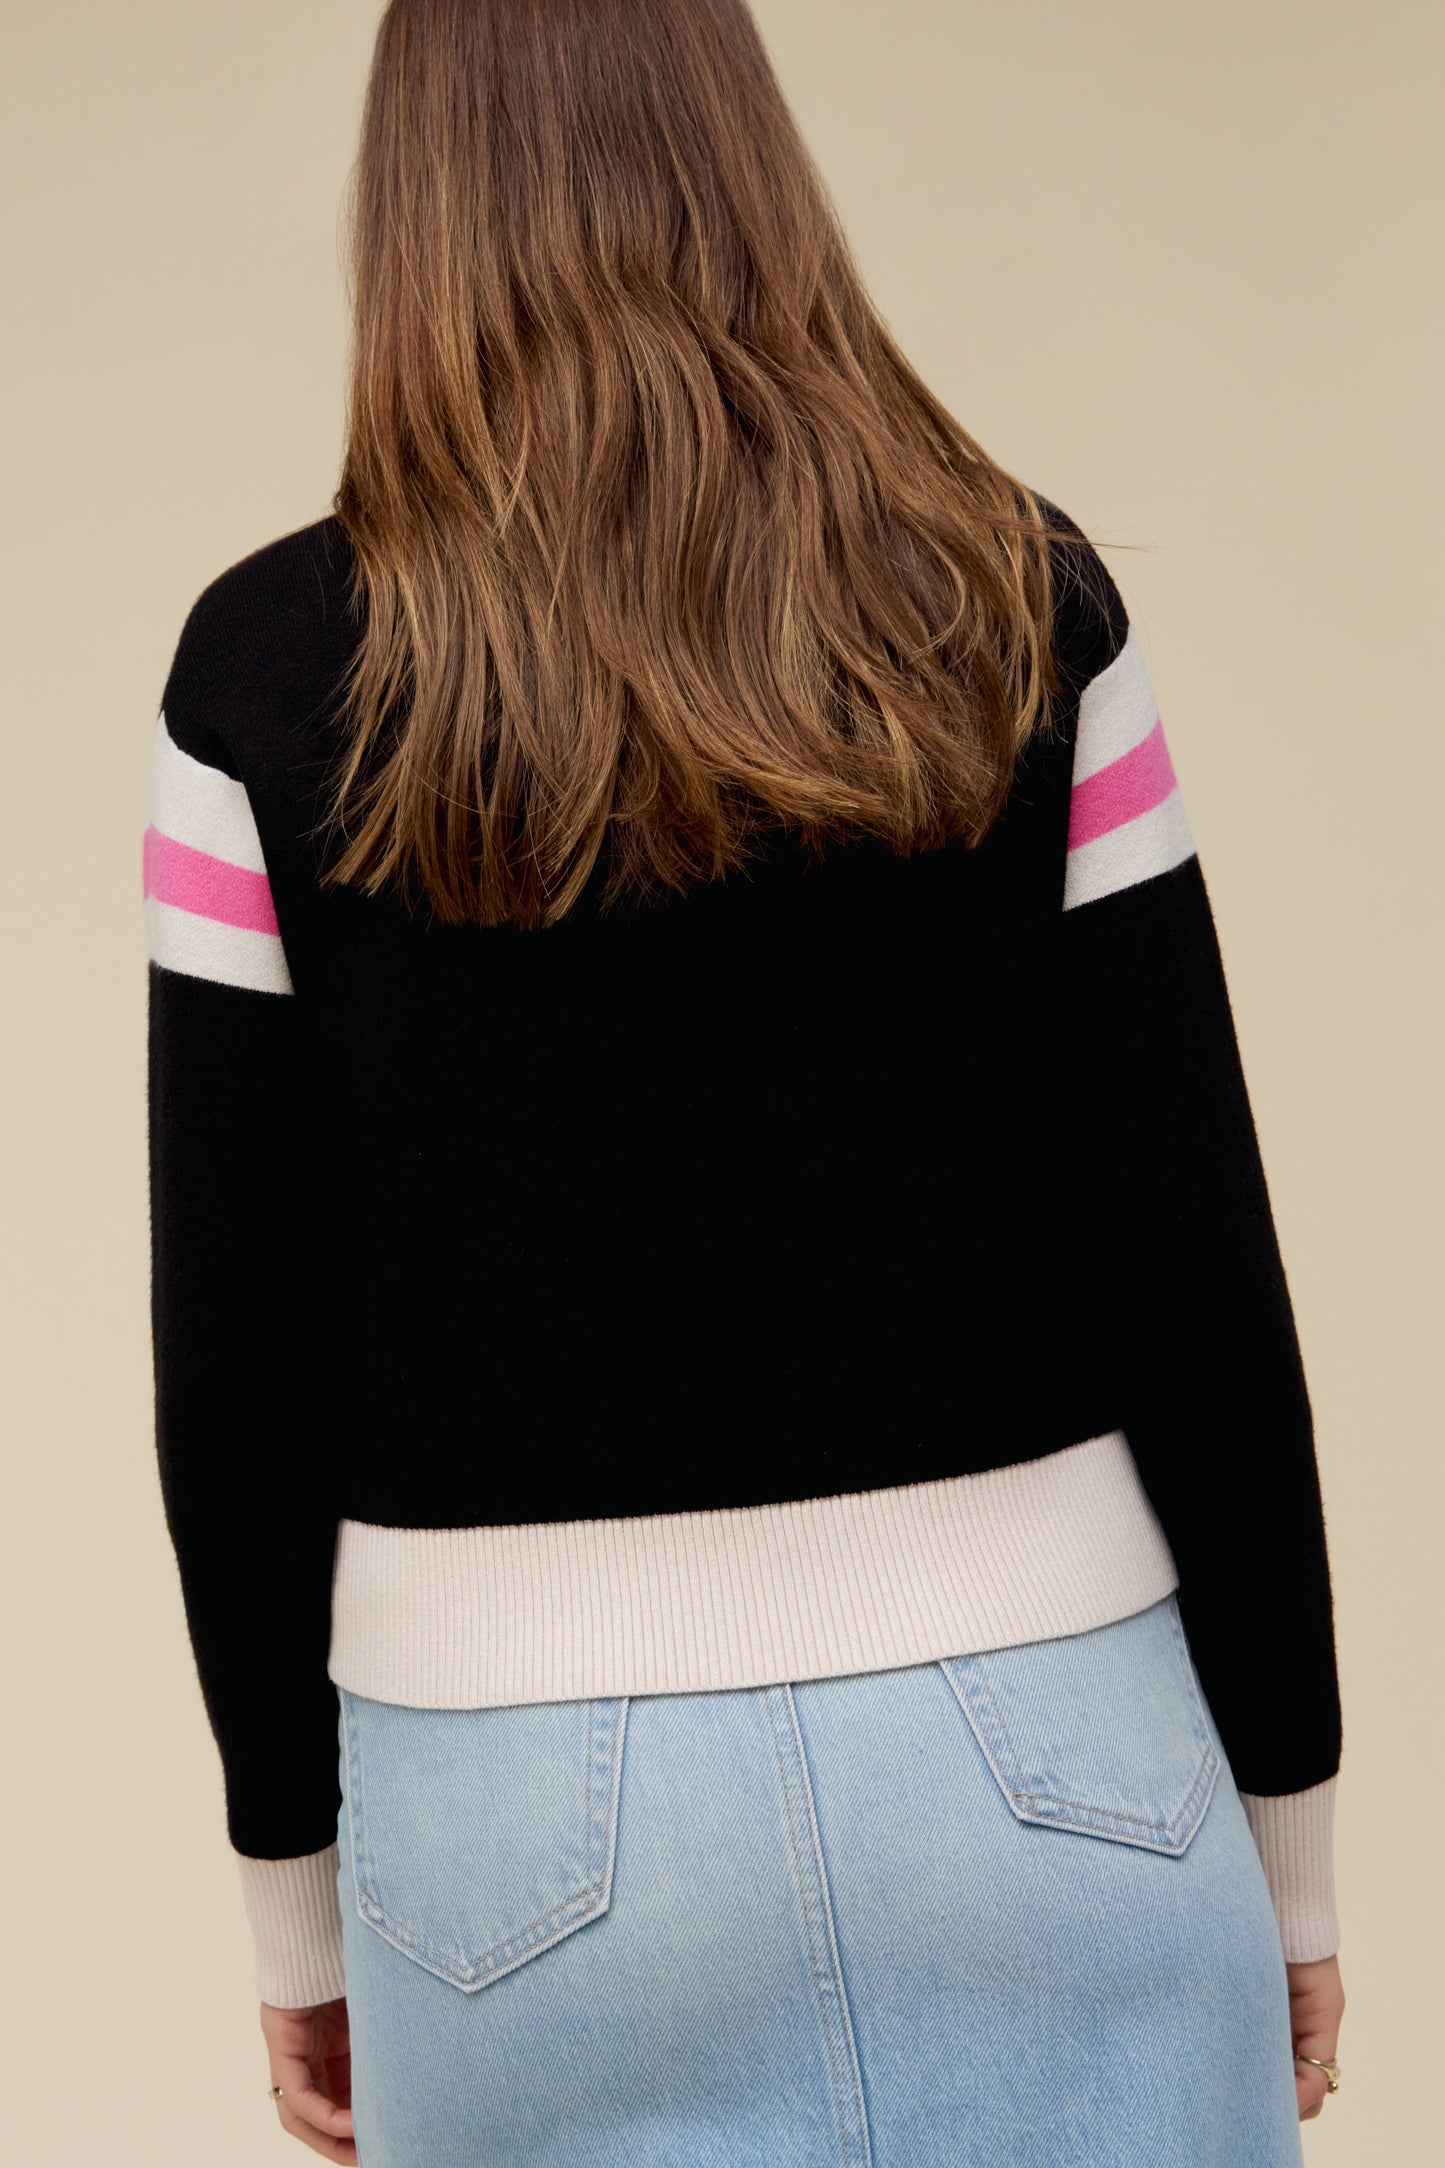 Pink Floyd Scattered Text Knit Pullover in Black